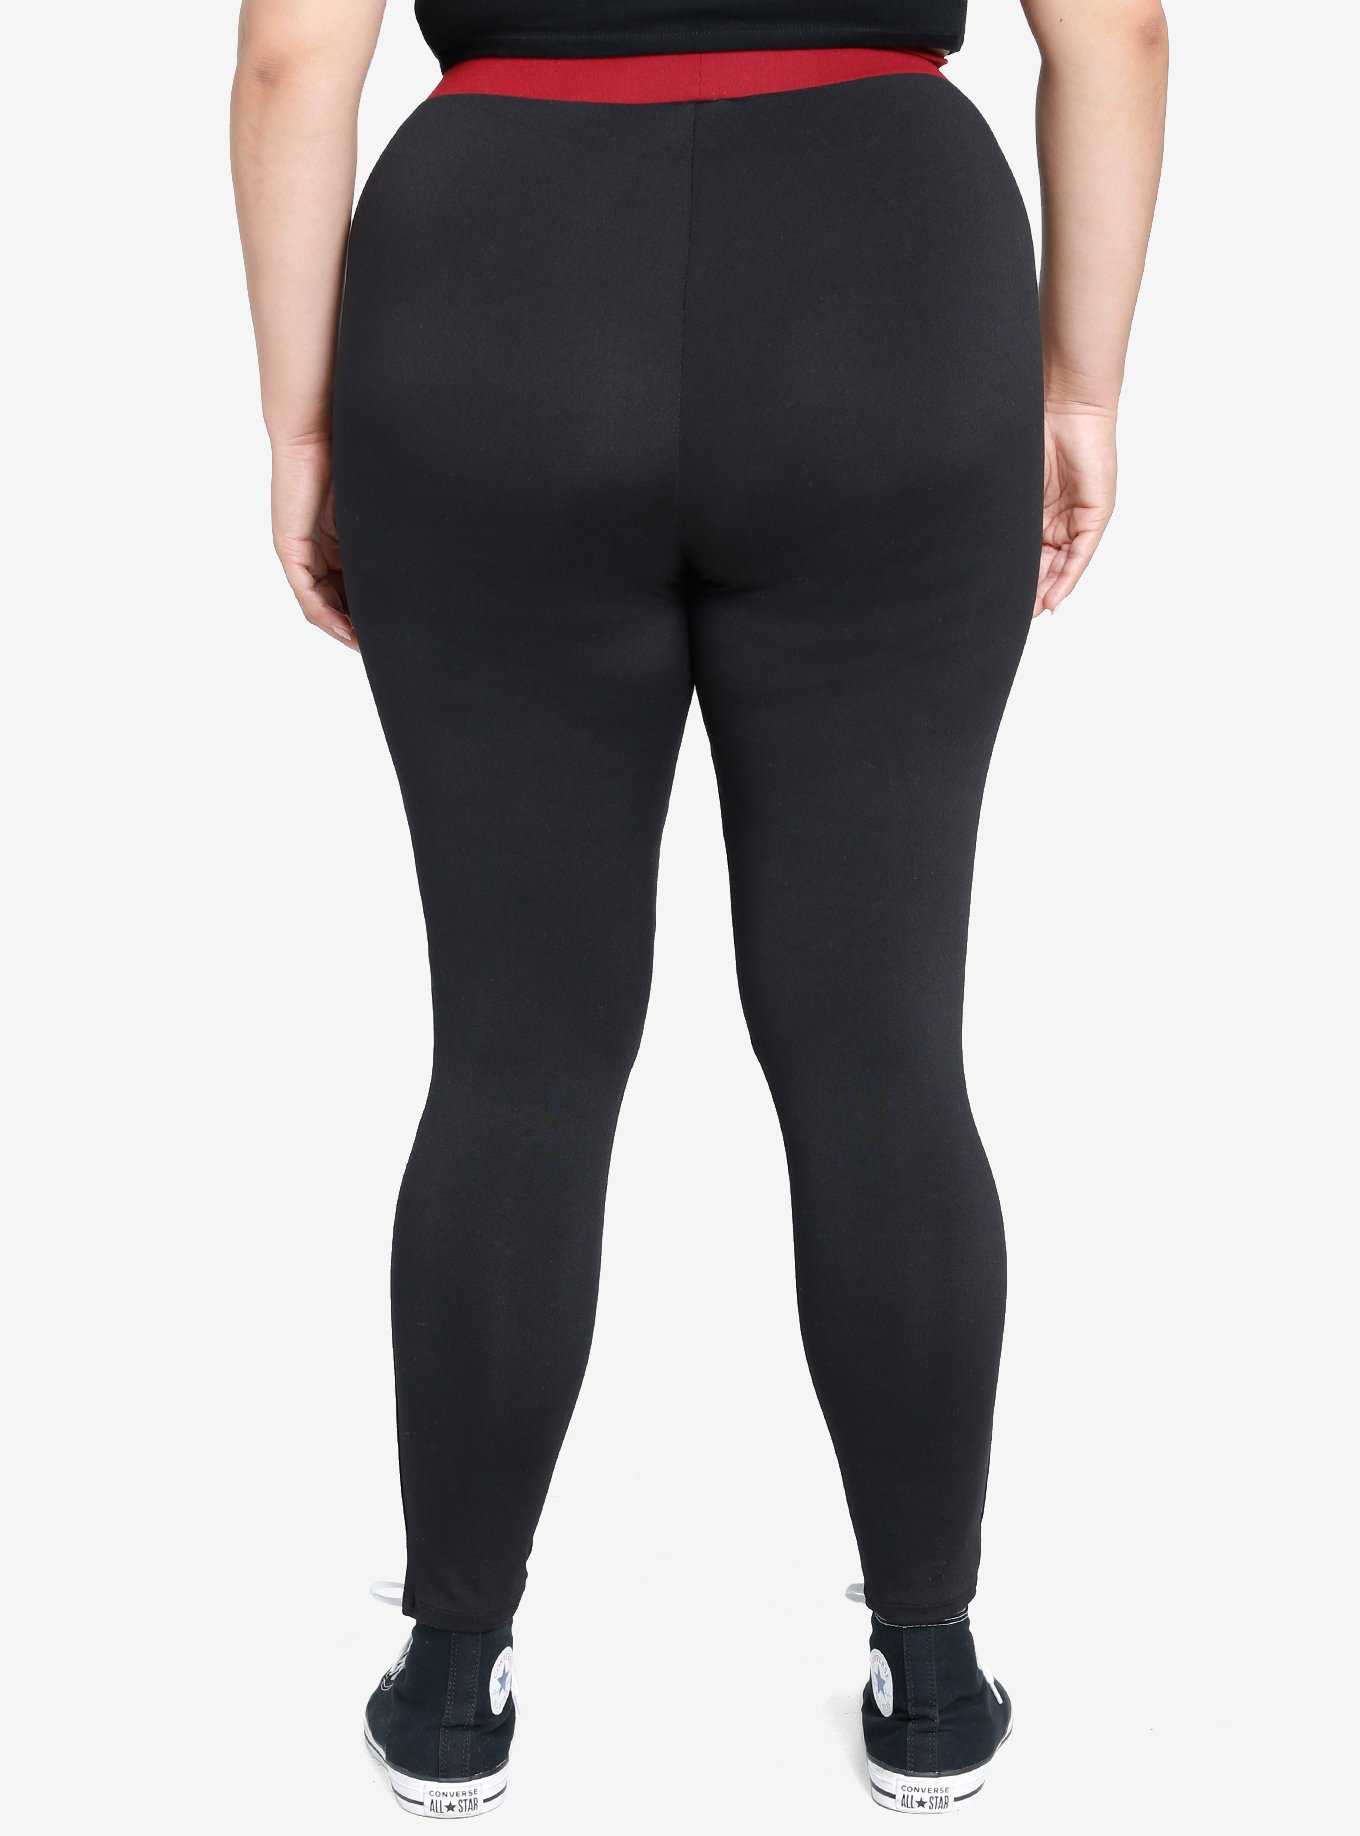 Spyder NICE Black High Rise Leggings Women's Size 2X Large GREAT CONDITION  - $25 - From Tiffany